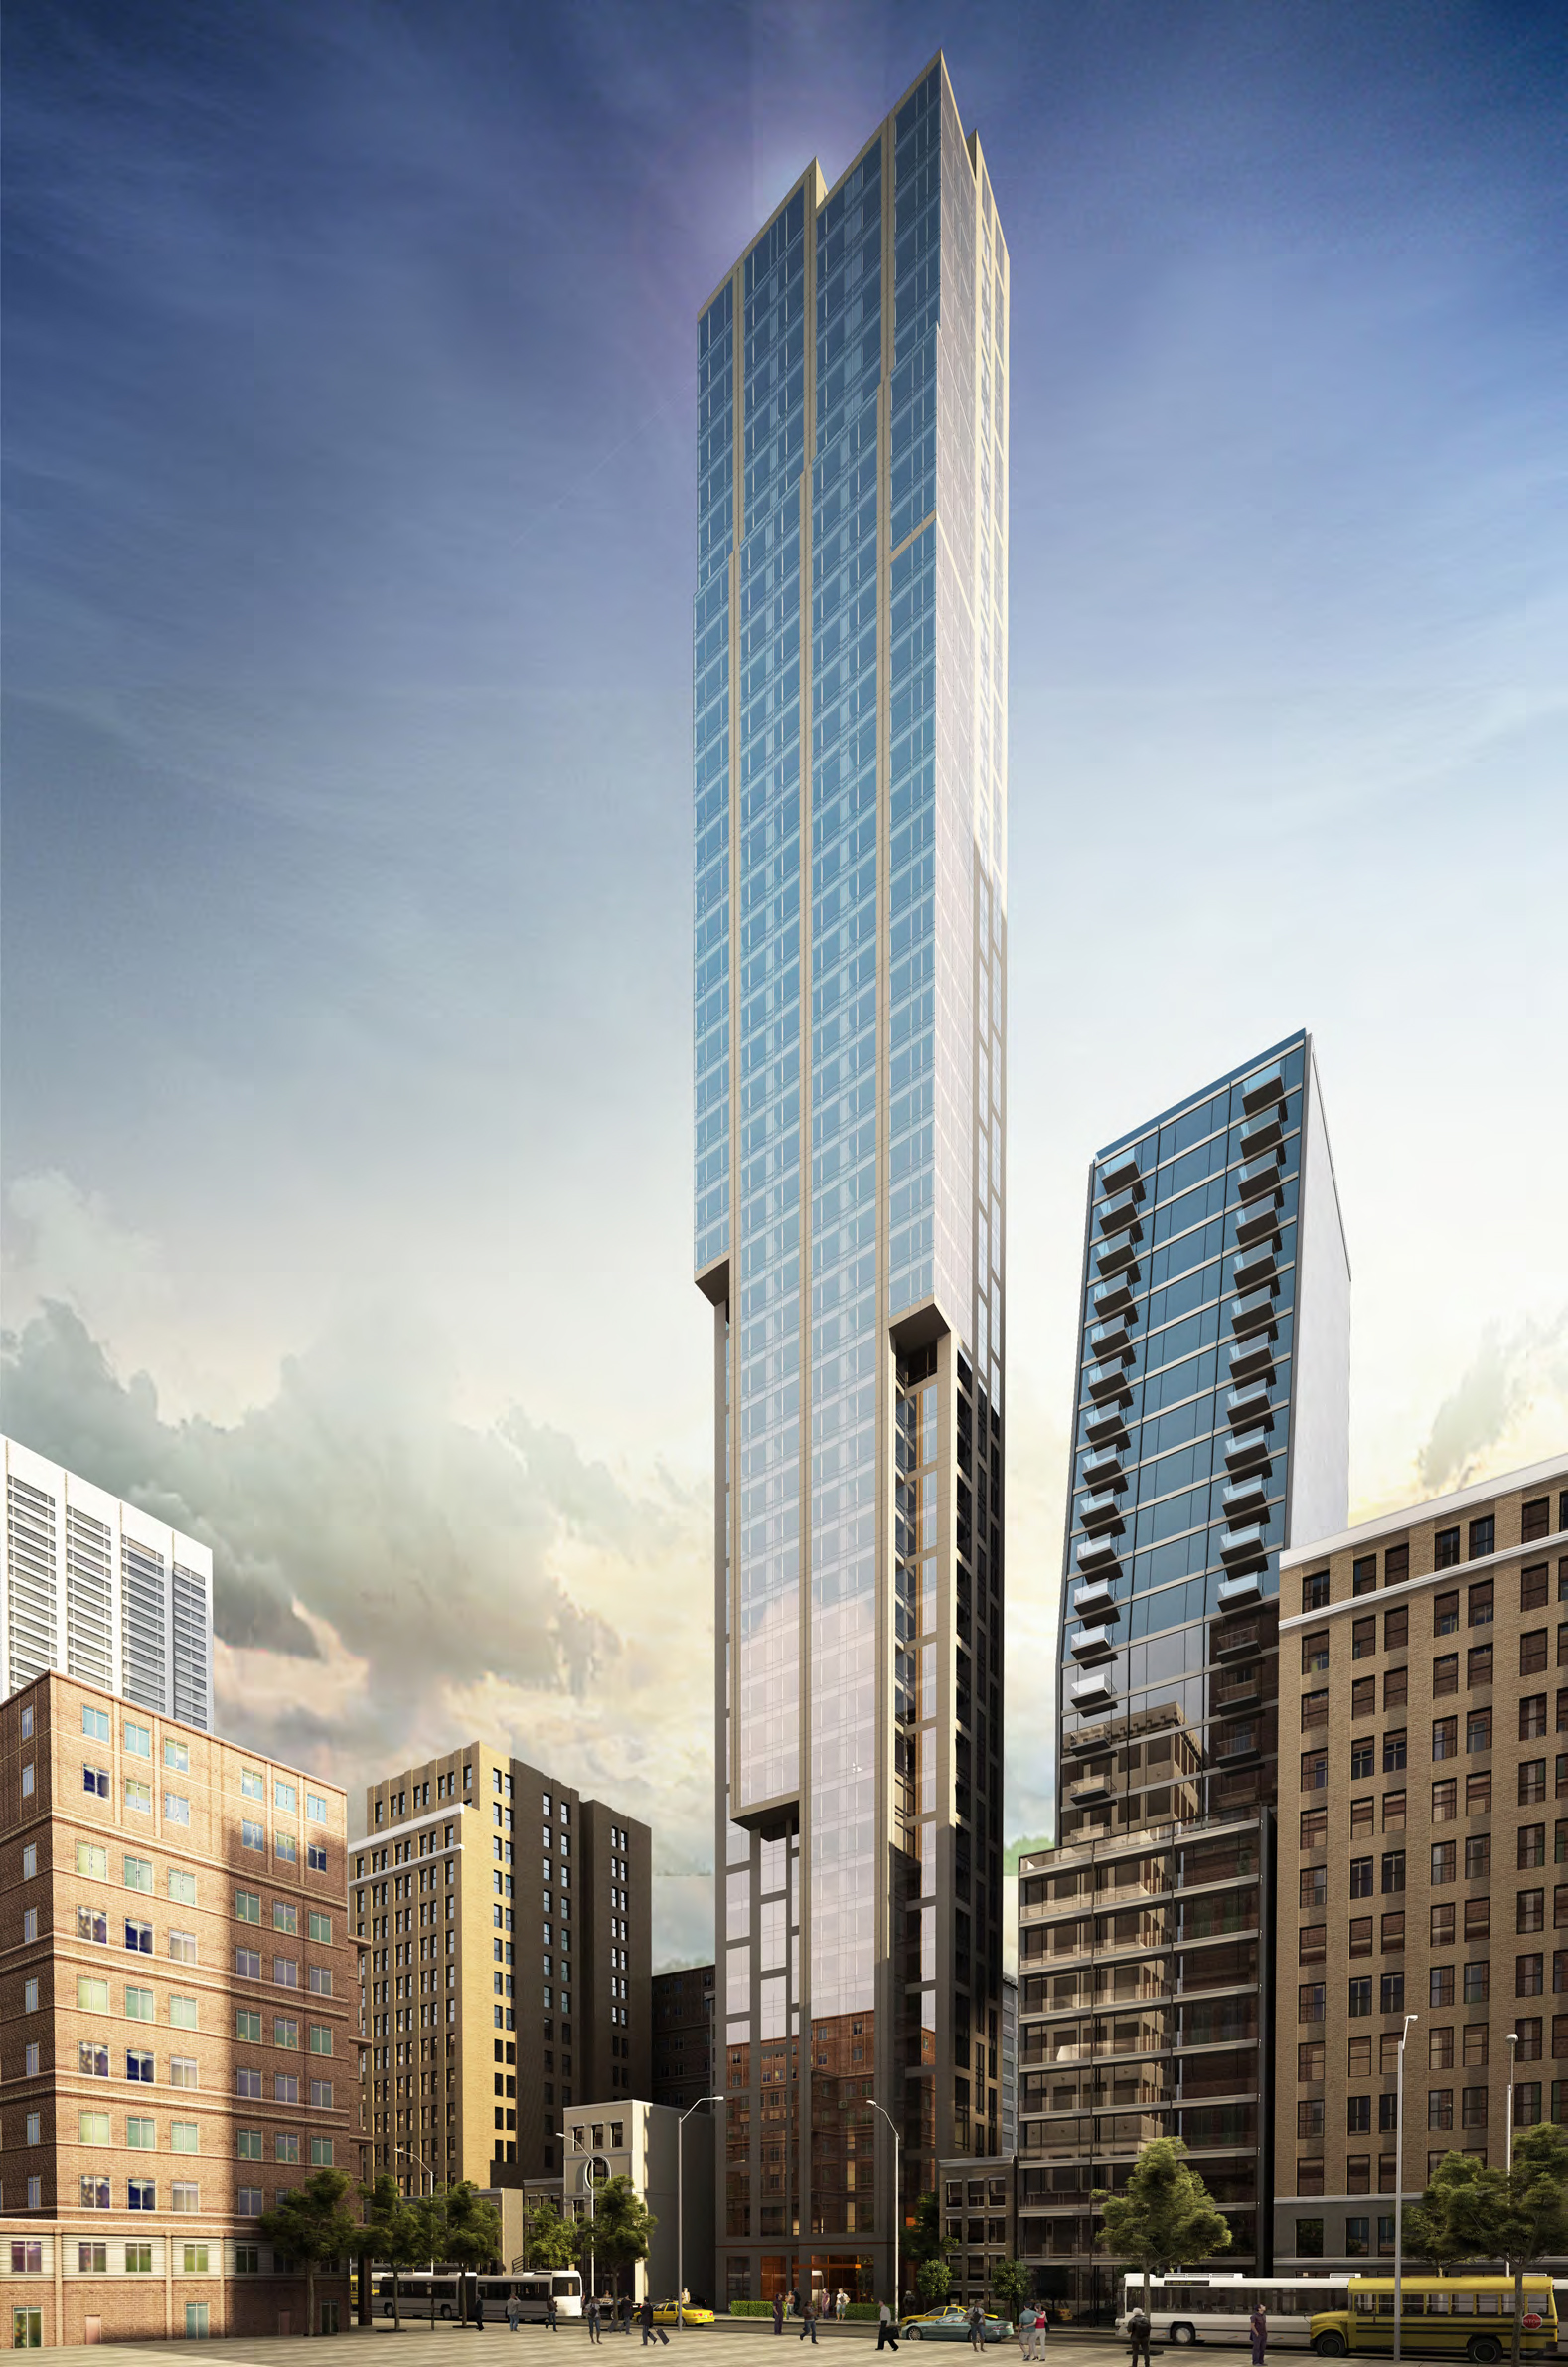 Rendering of 131 East 47th Street, southeast perspective. Credit: SLCE Architects